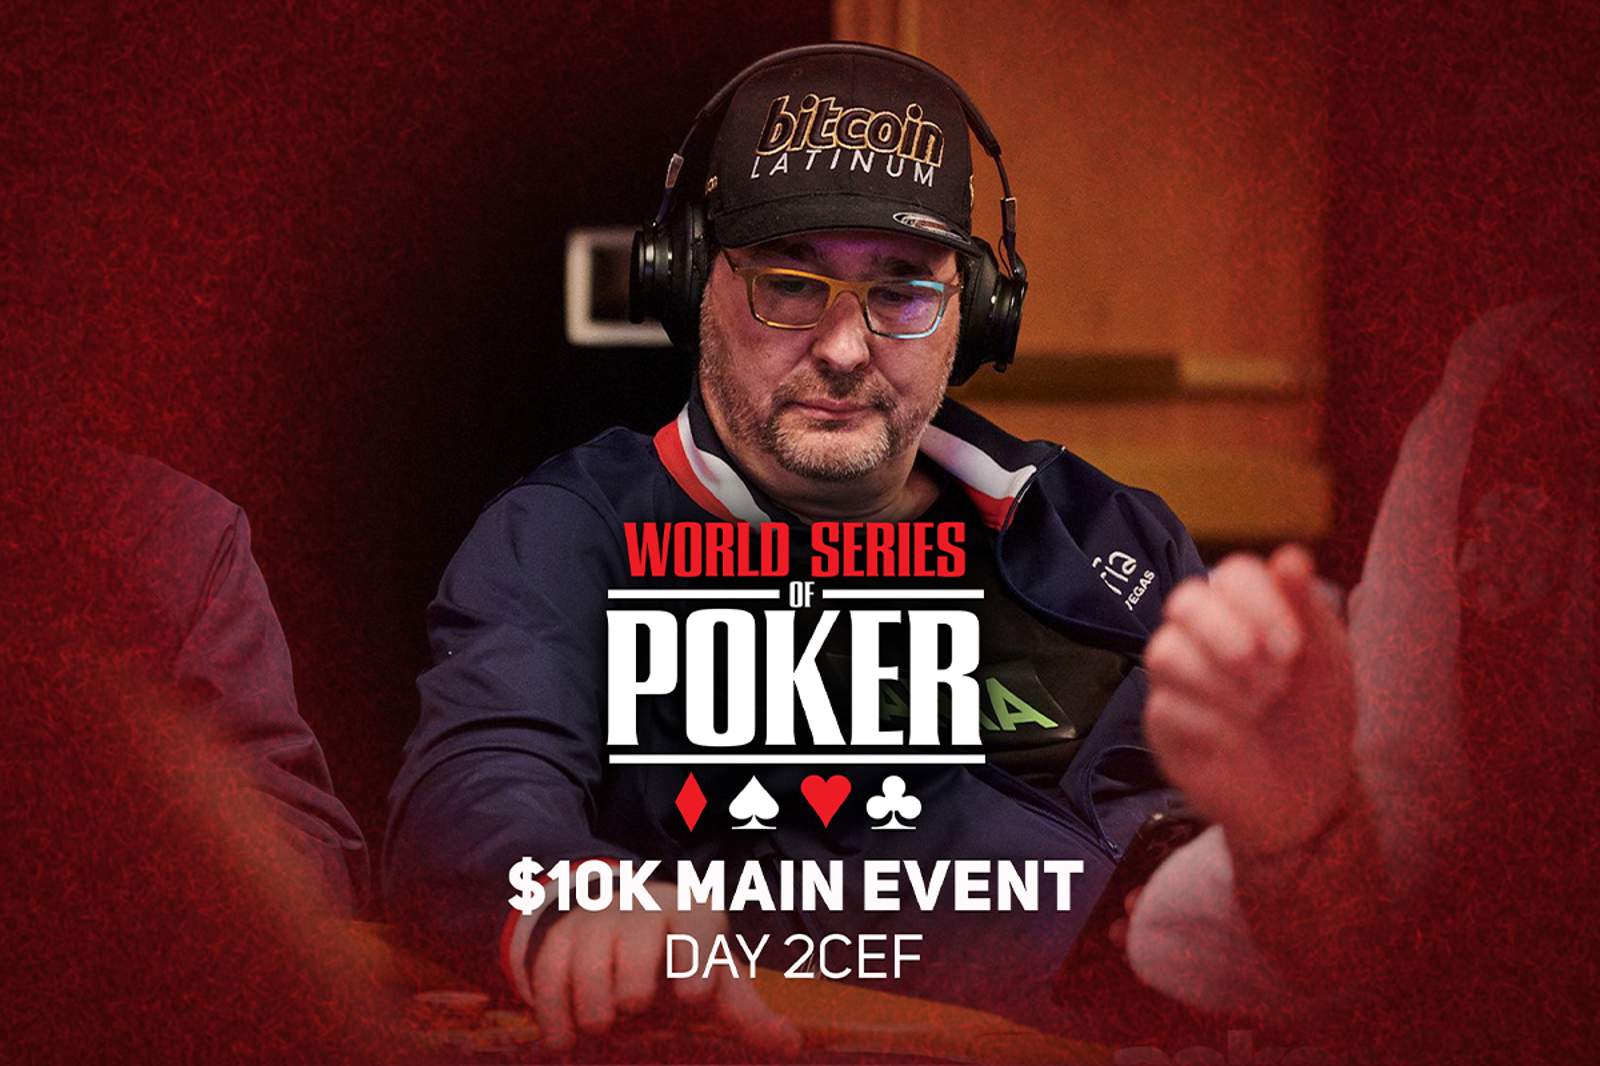 Watch Day 2C/E/F of the 2021 WSOP Main Event on PokerGO.com at 7:30 p.m. ET